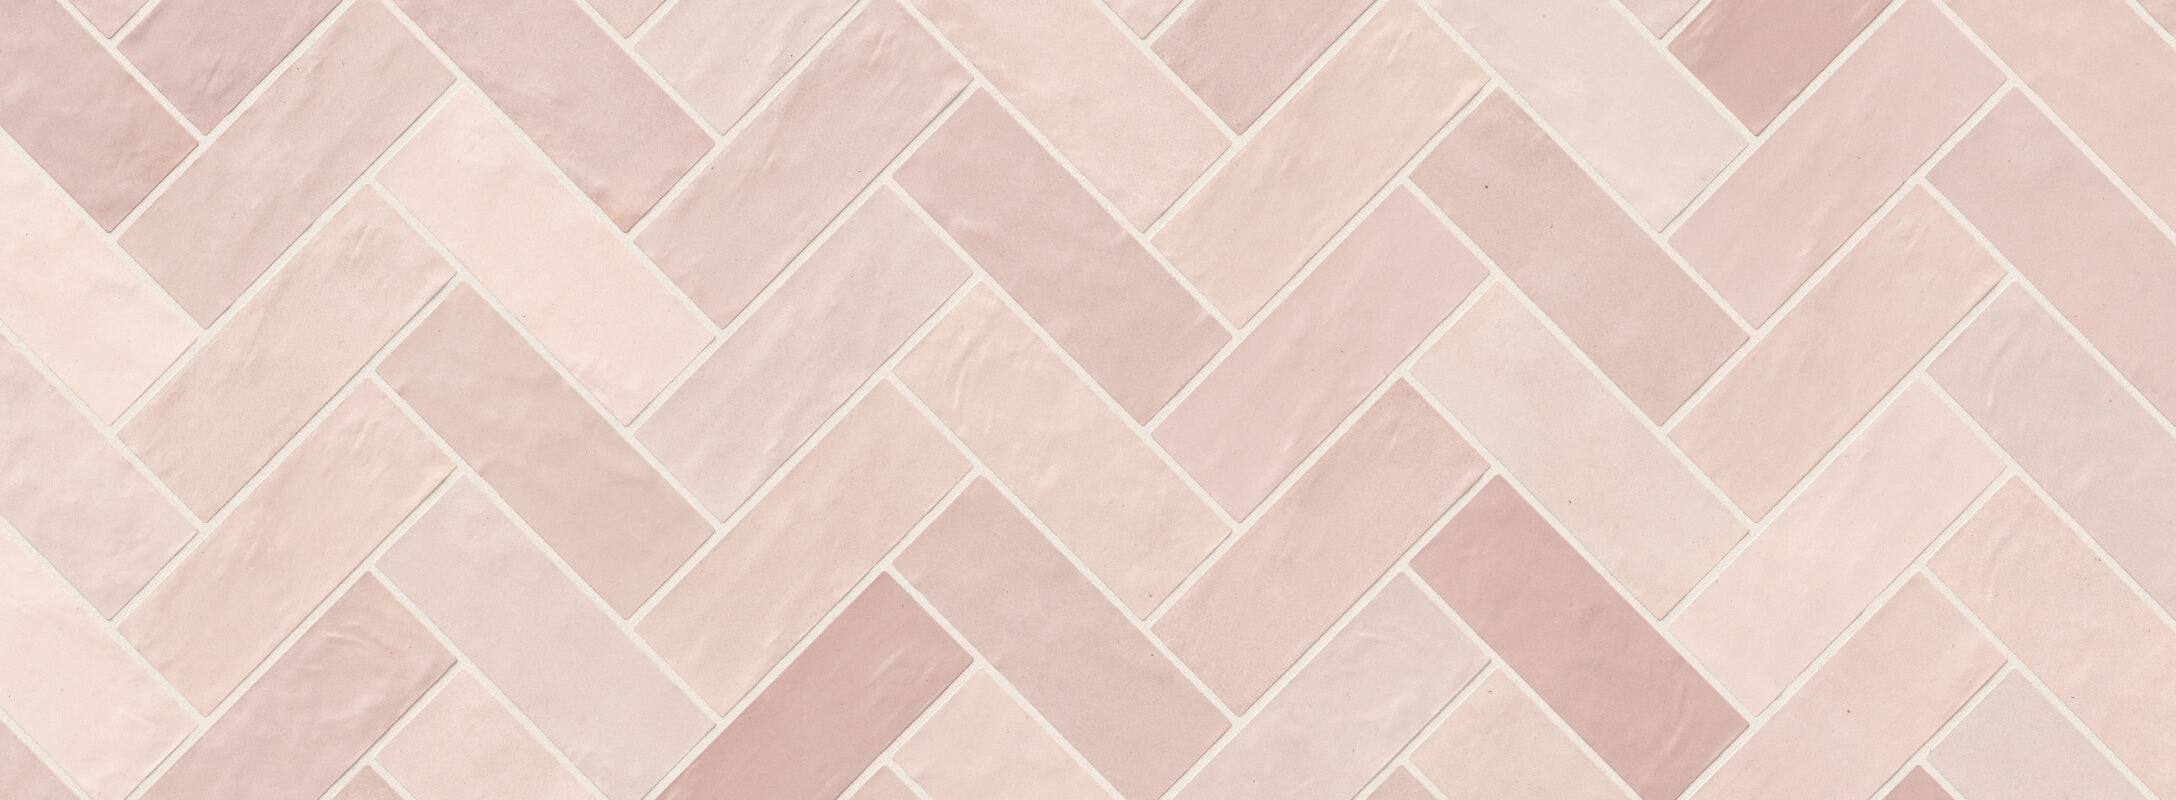 Red herringbone tiles in light shades with a subtle texture, perfect for adding a soft, elegant touch to kitchen walls